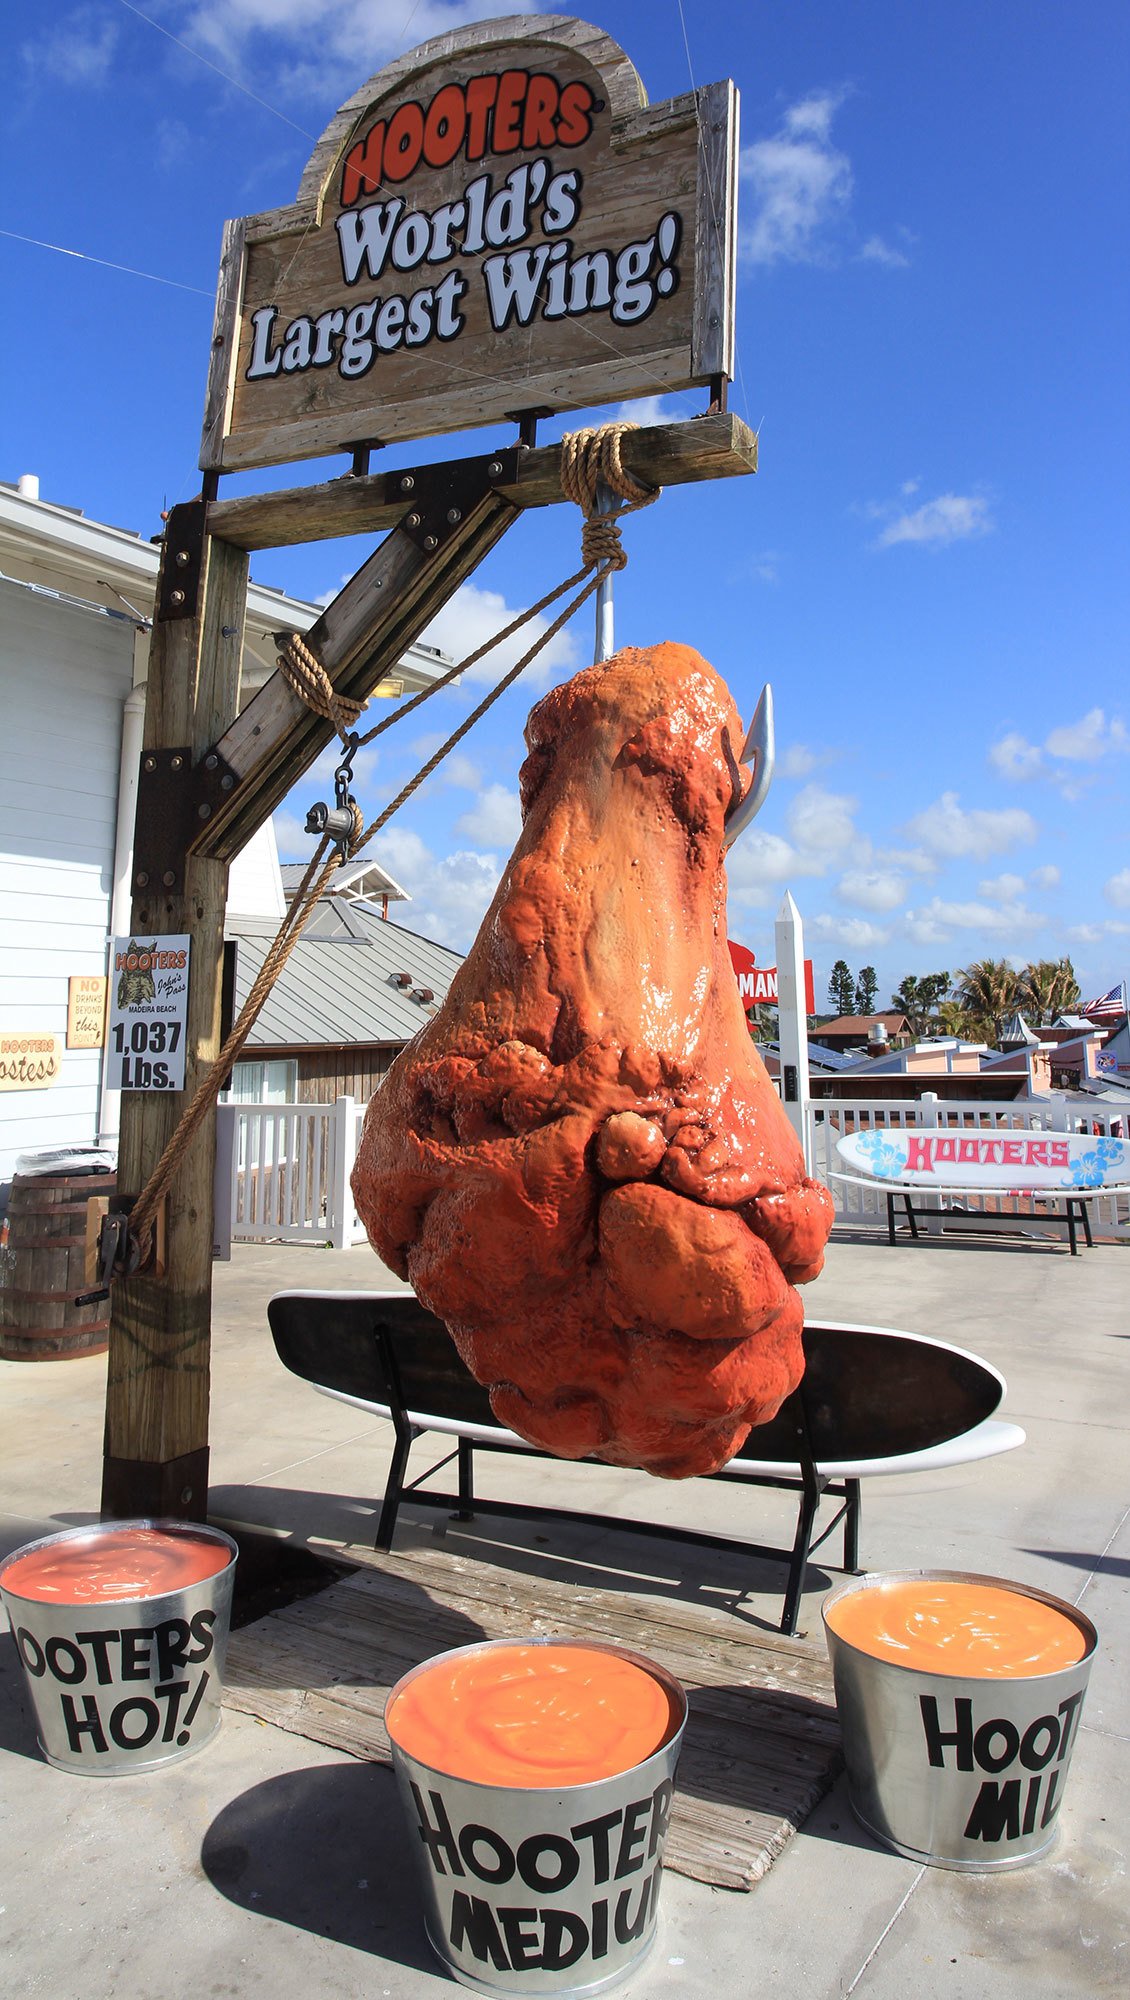 World's Largest Wing 3D Sculpted Chicken Wing for Hooters at John's Pass in Madeira Beach